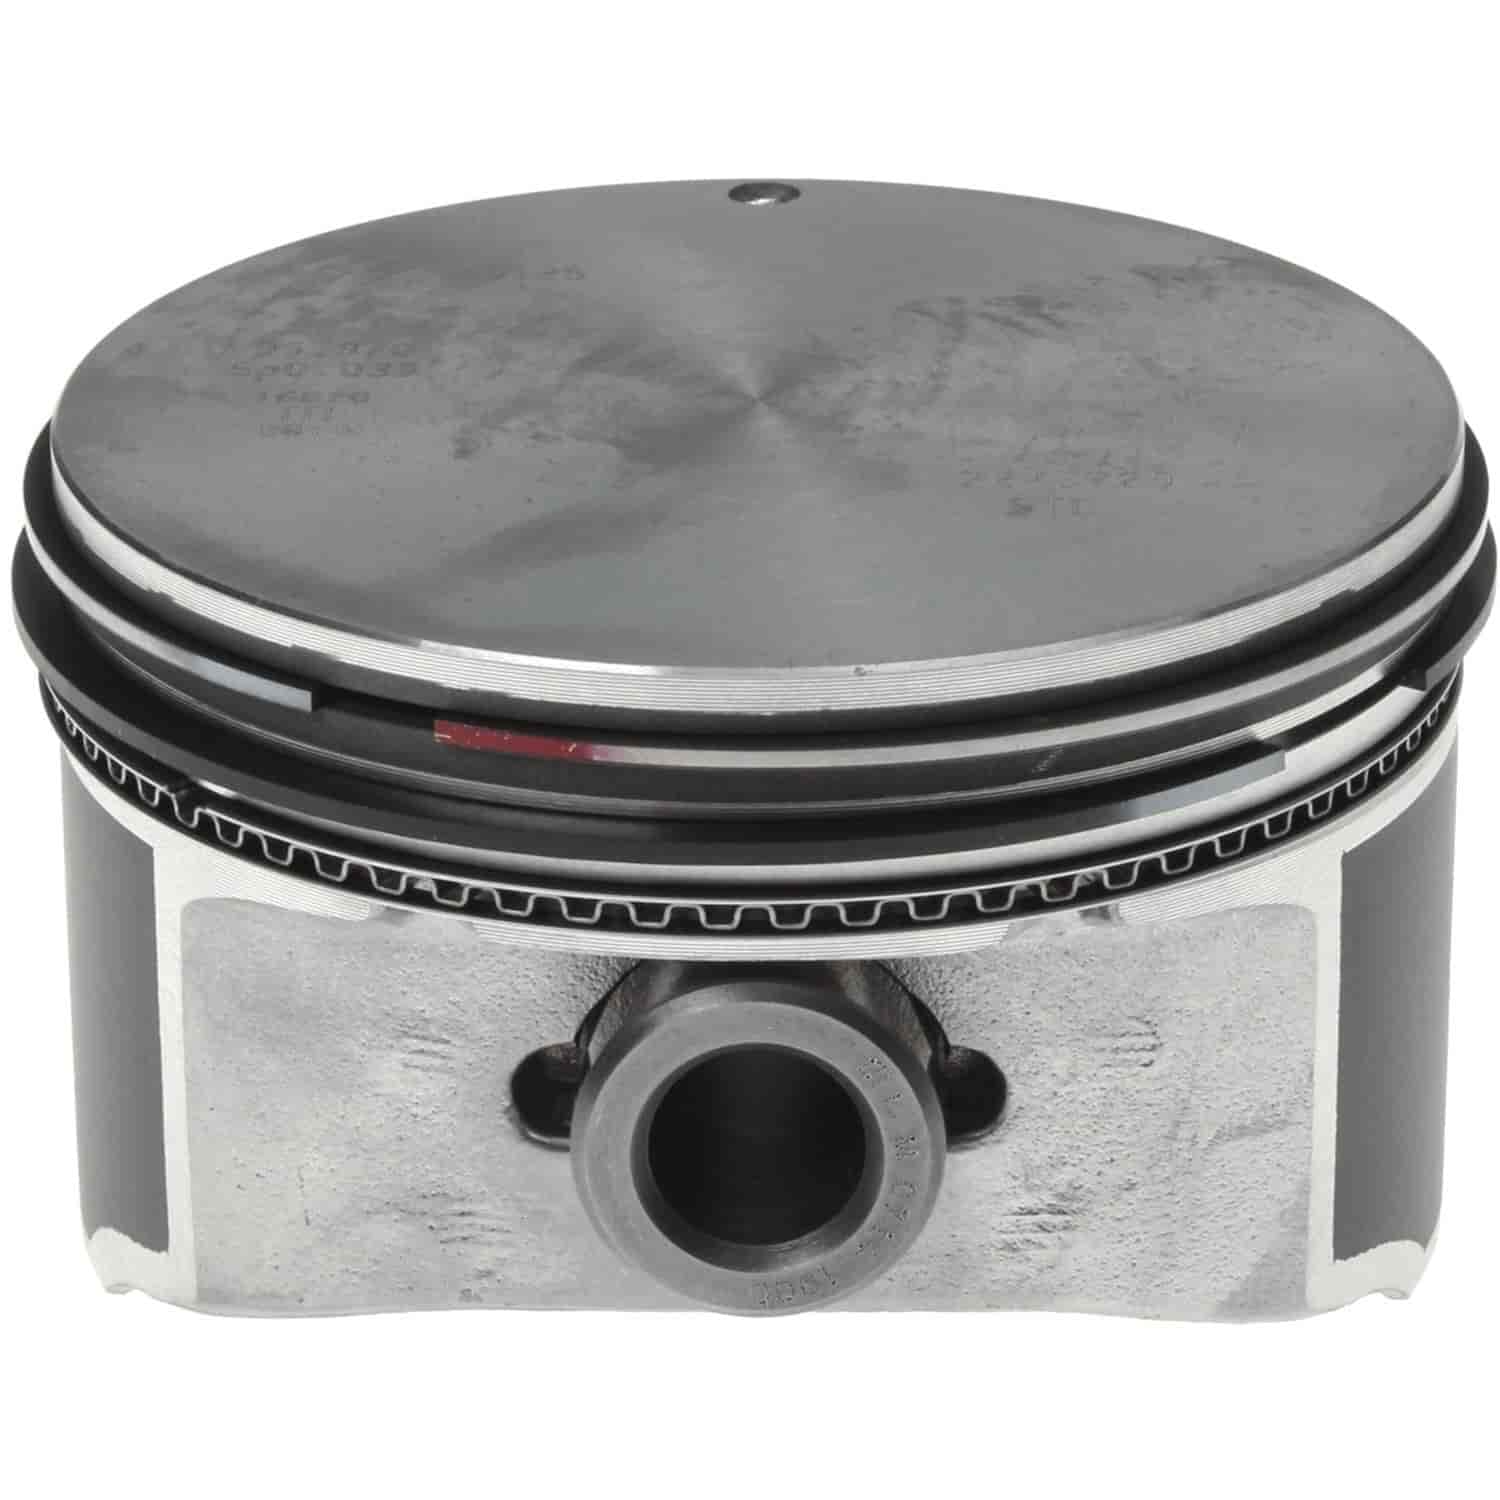 Piston With Rings 2005-2009 Chevy LS V8 4.8/5.3L with 3.810"/96.75mm Bore (+.75mm)